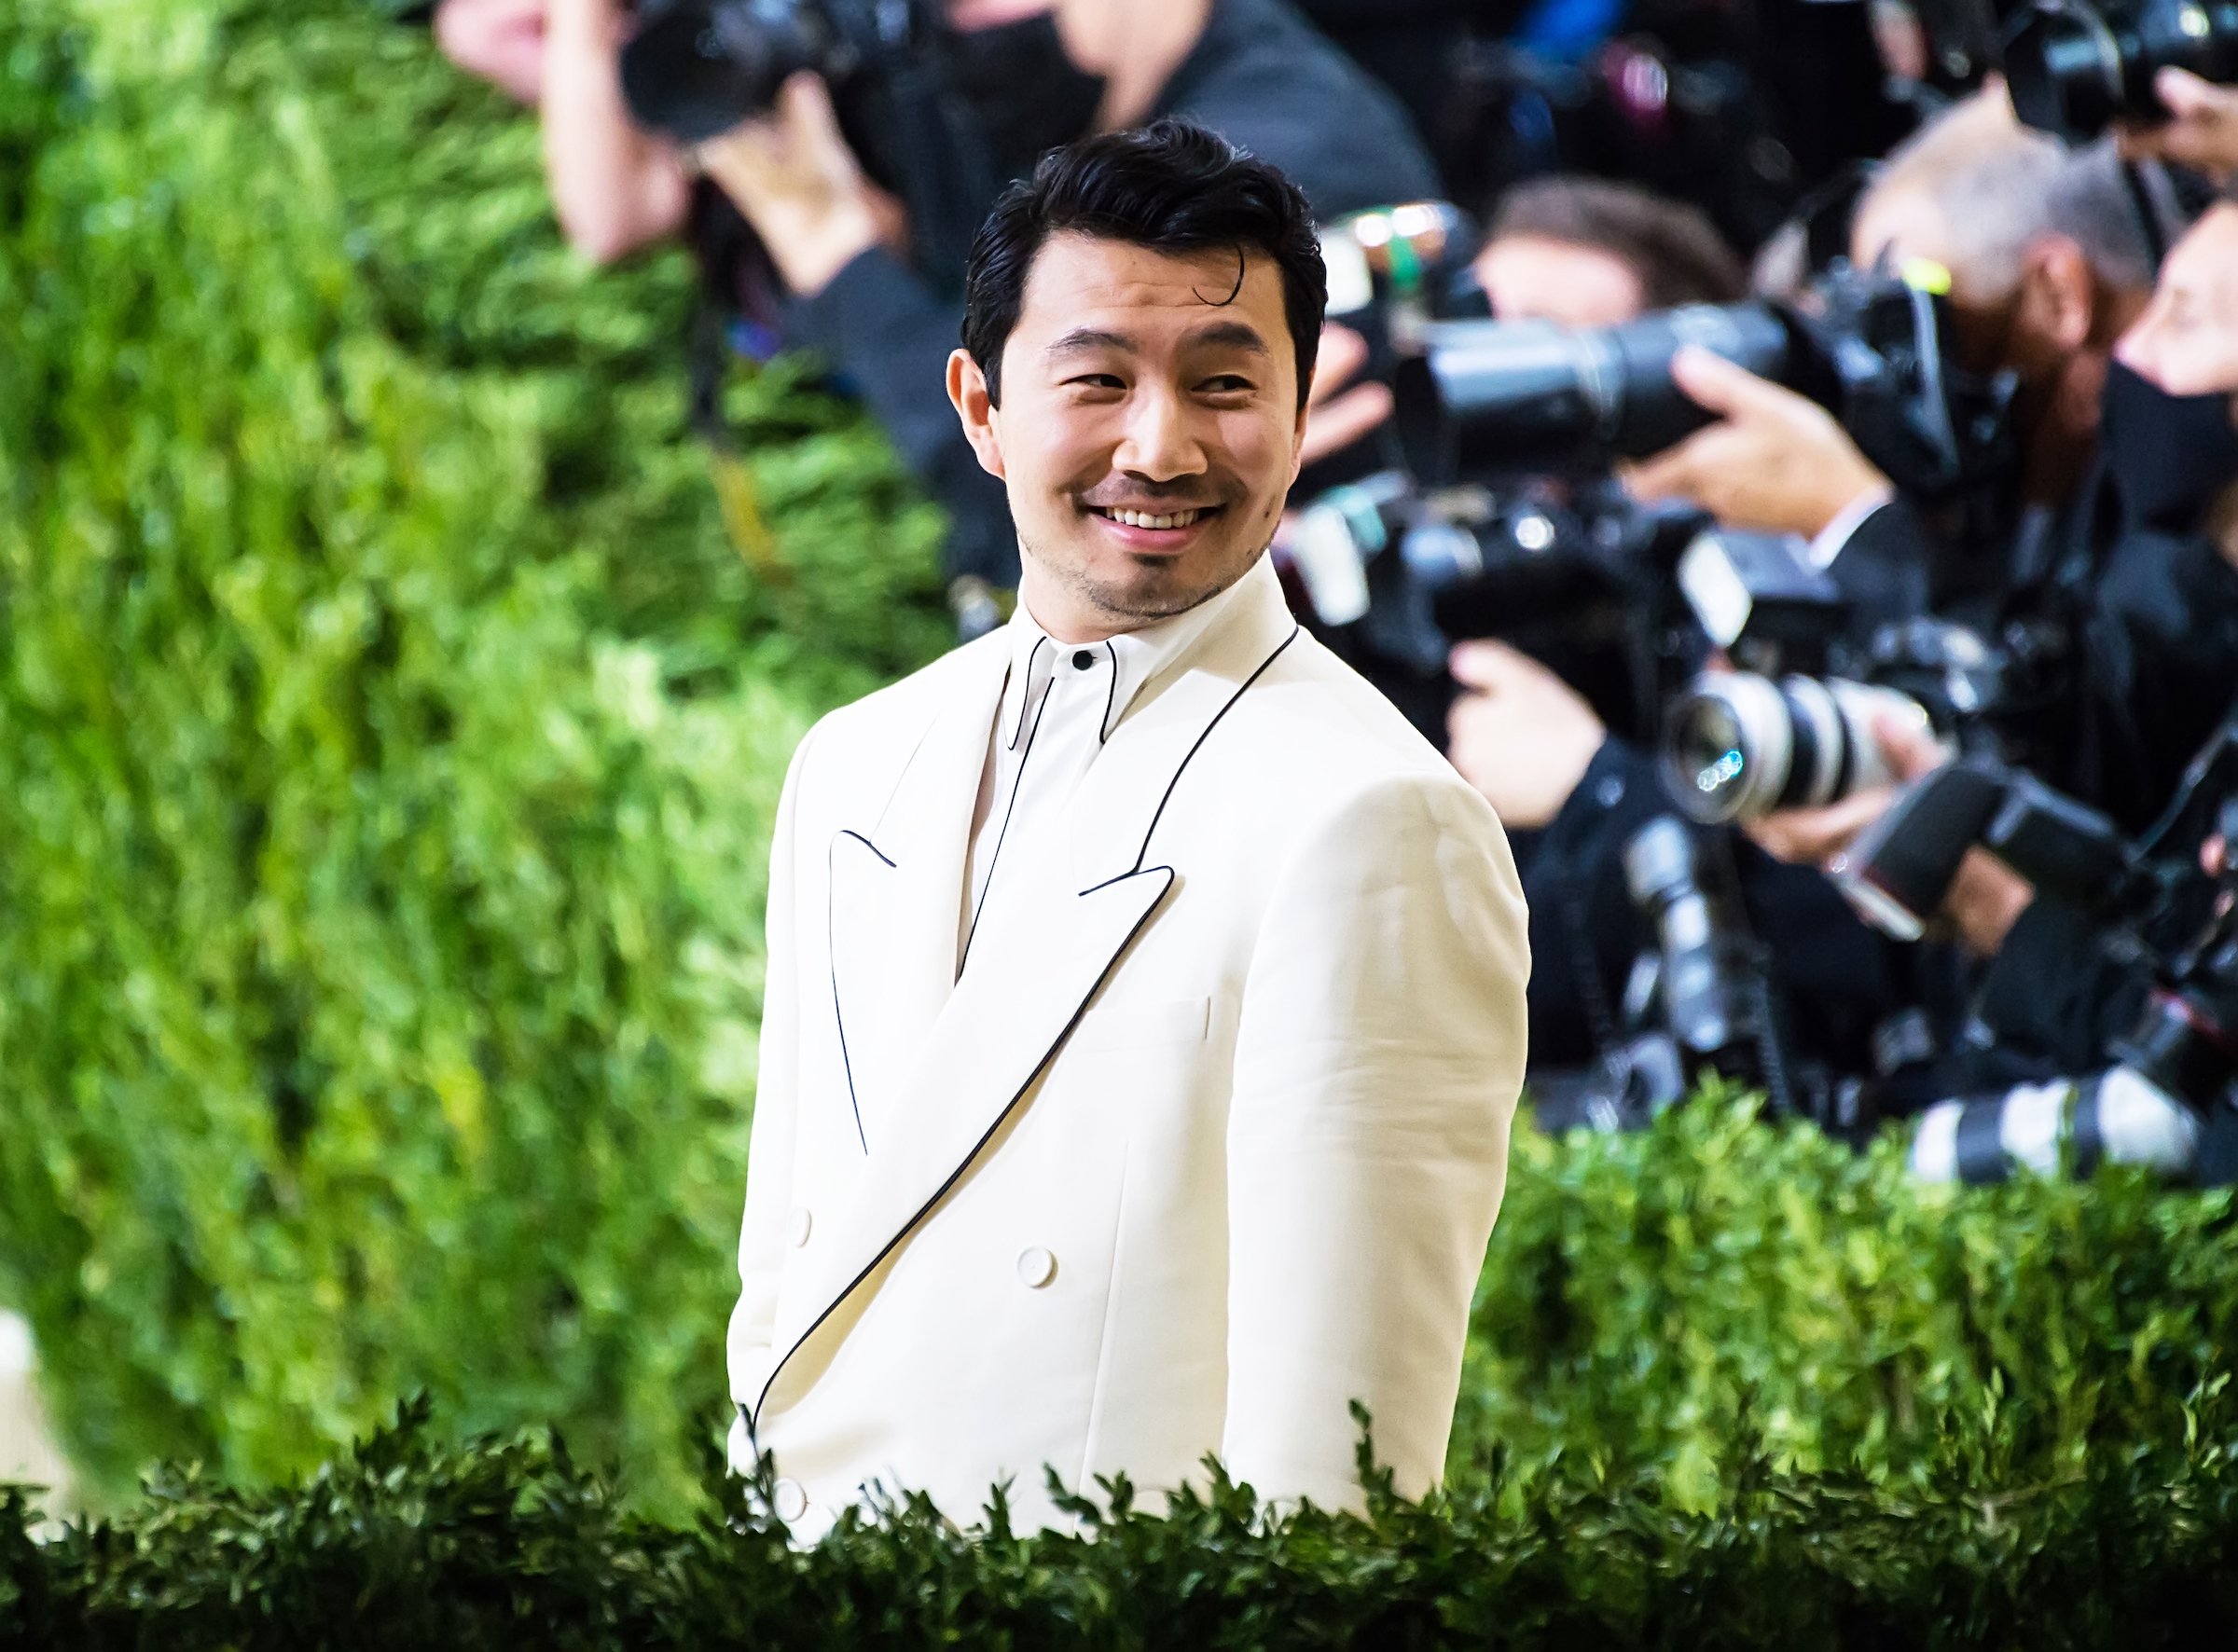 Actor Simu Liu attends The 2021 Met Gala Celebrating In America: A Lexicon Of Fashion